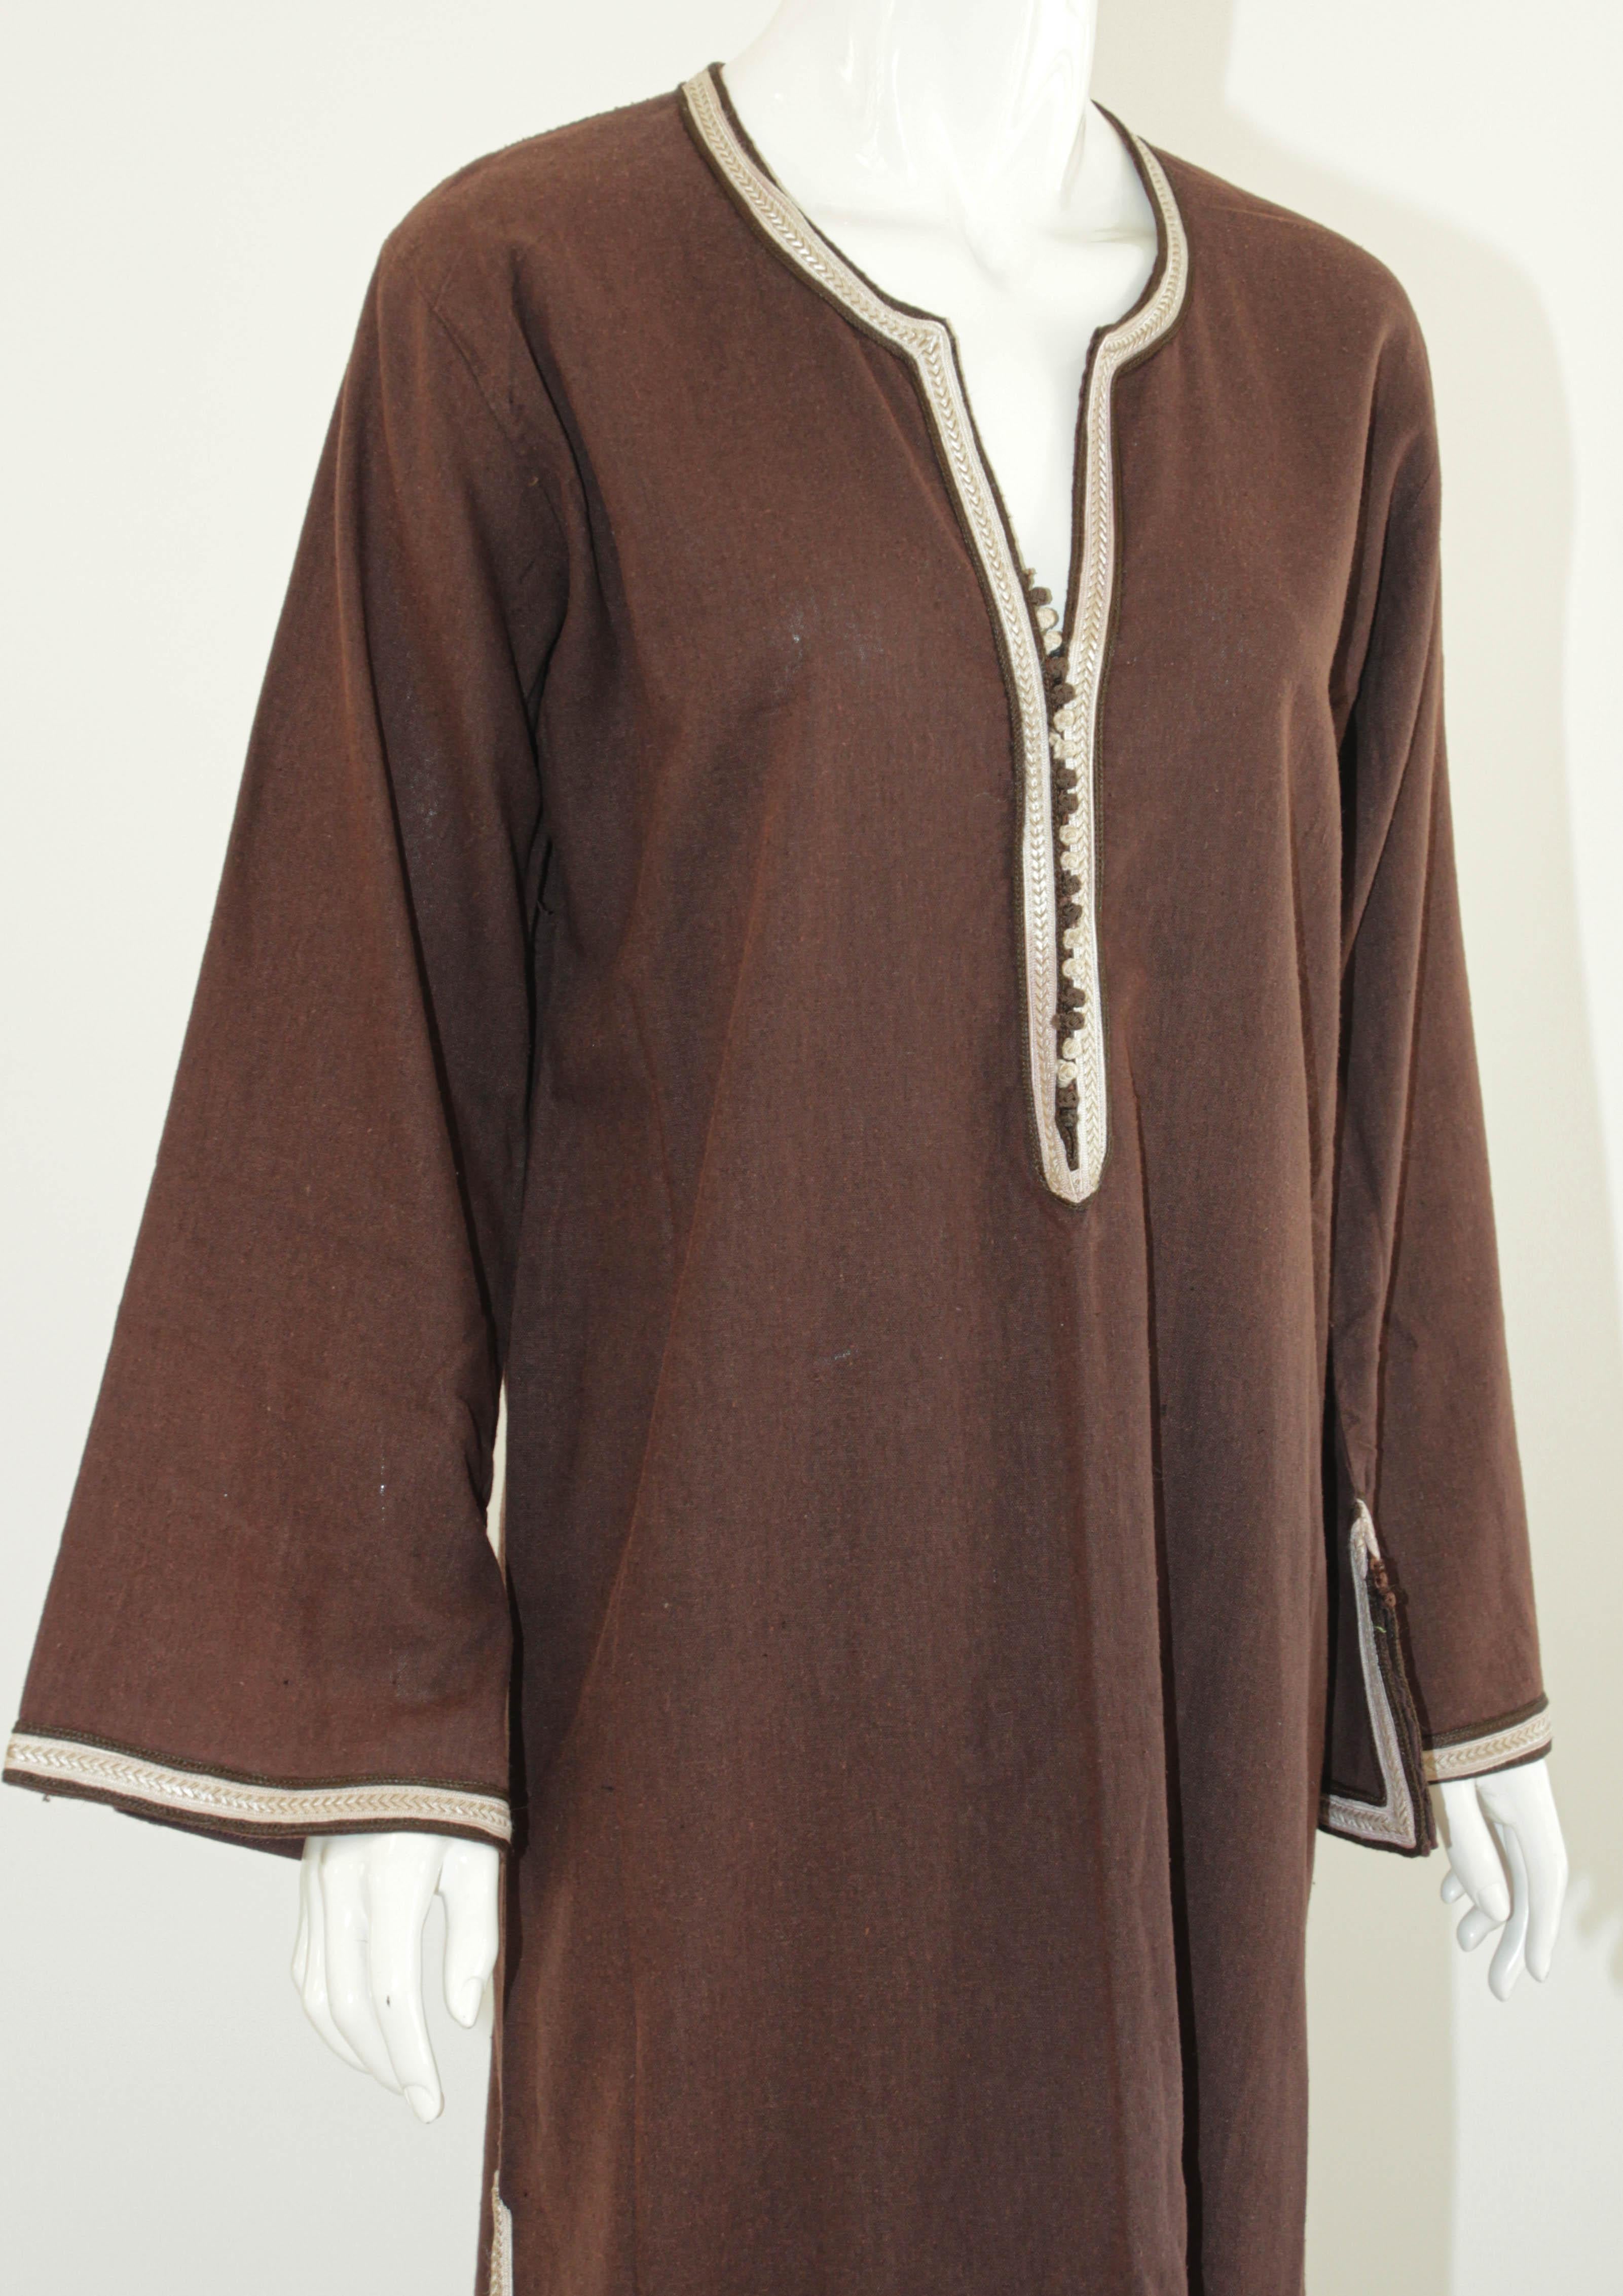 Moroccan Kaftan, 1980 Vintage Kaftan Brown Cotton Bohemian Style In Good Condition For Sale In North Hollywood, CA